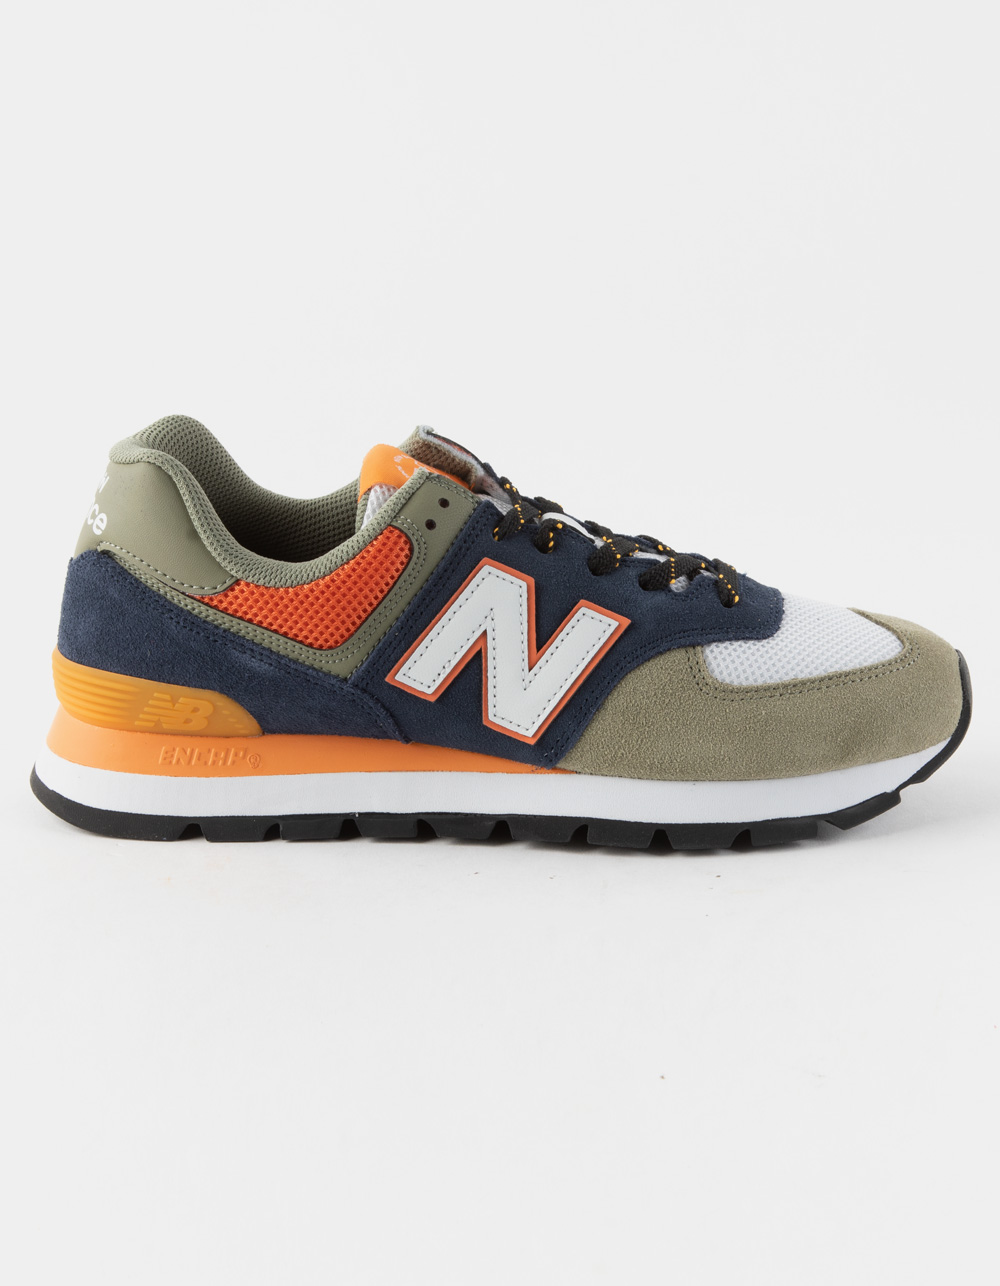 NEW BALANCE 574 Rugged Mens Shoes - GREEN COMBO | Tillys